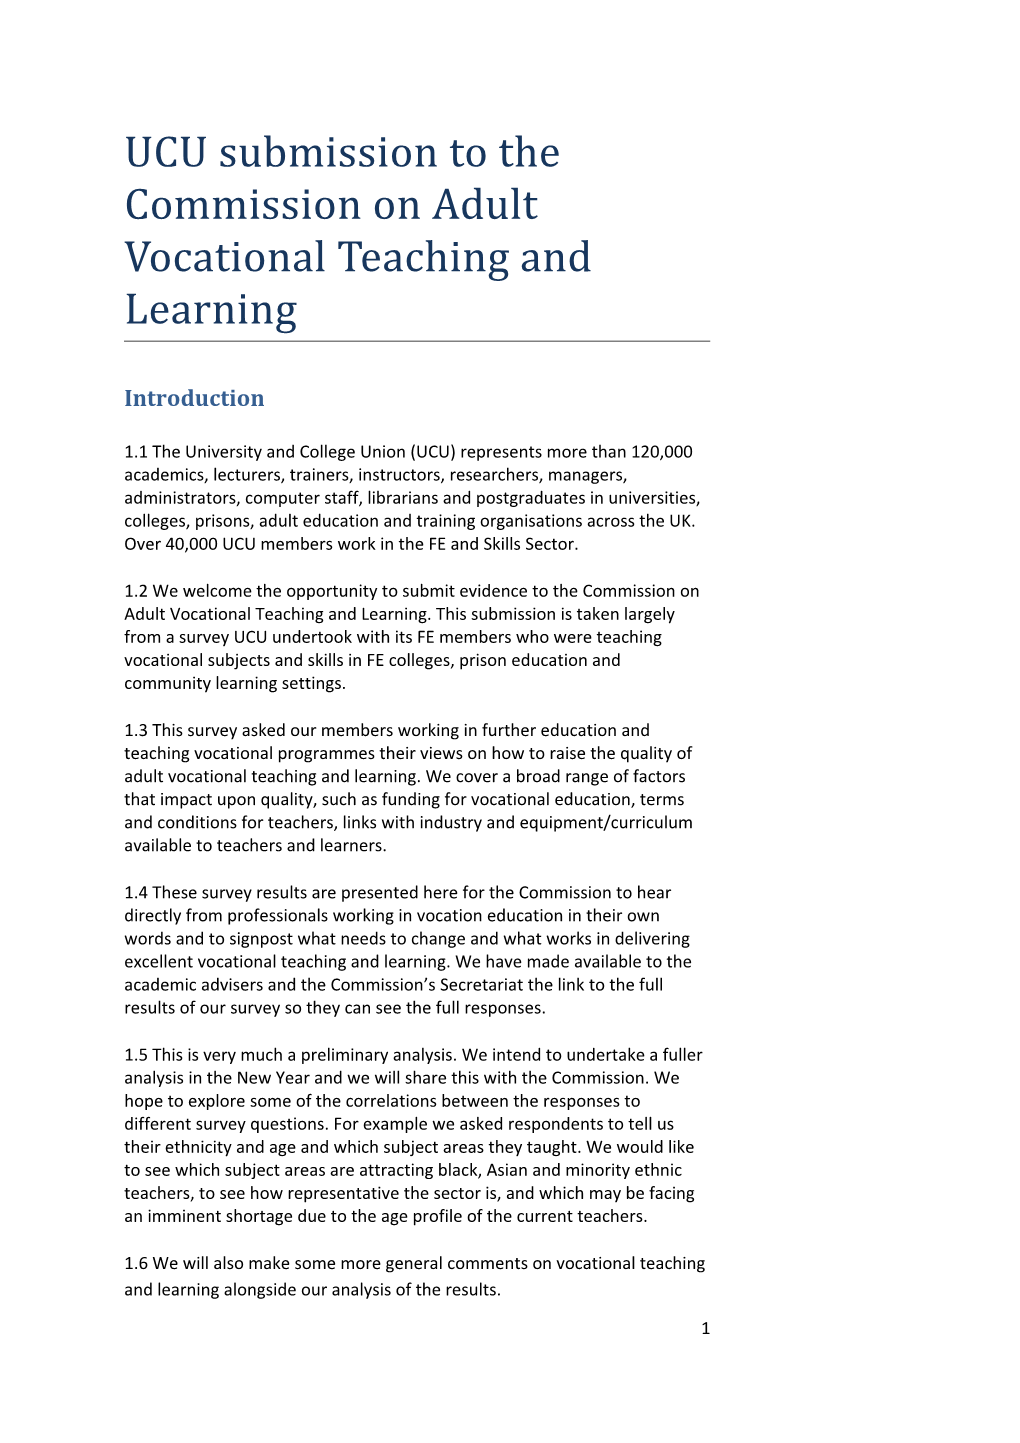 UCU Submission to the Commission on Adult Vocational Teaching and Learning